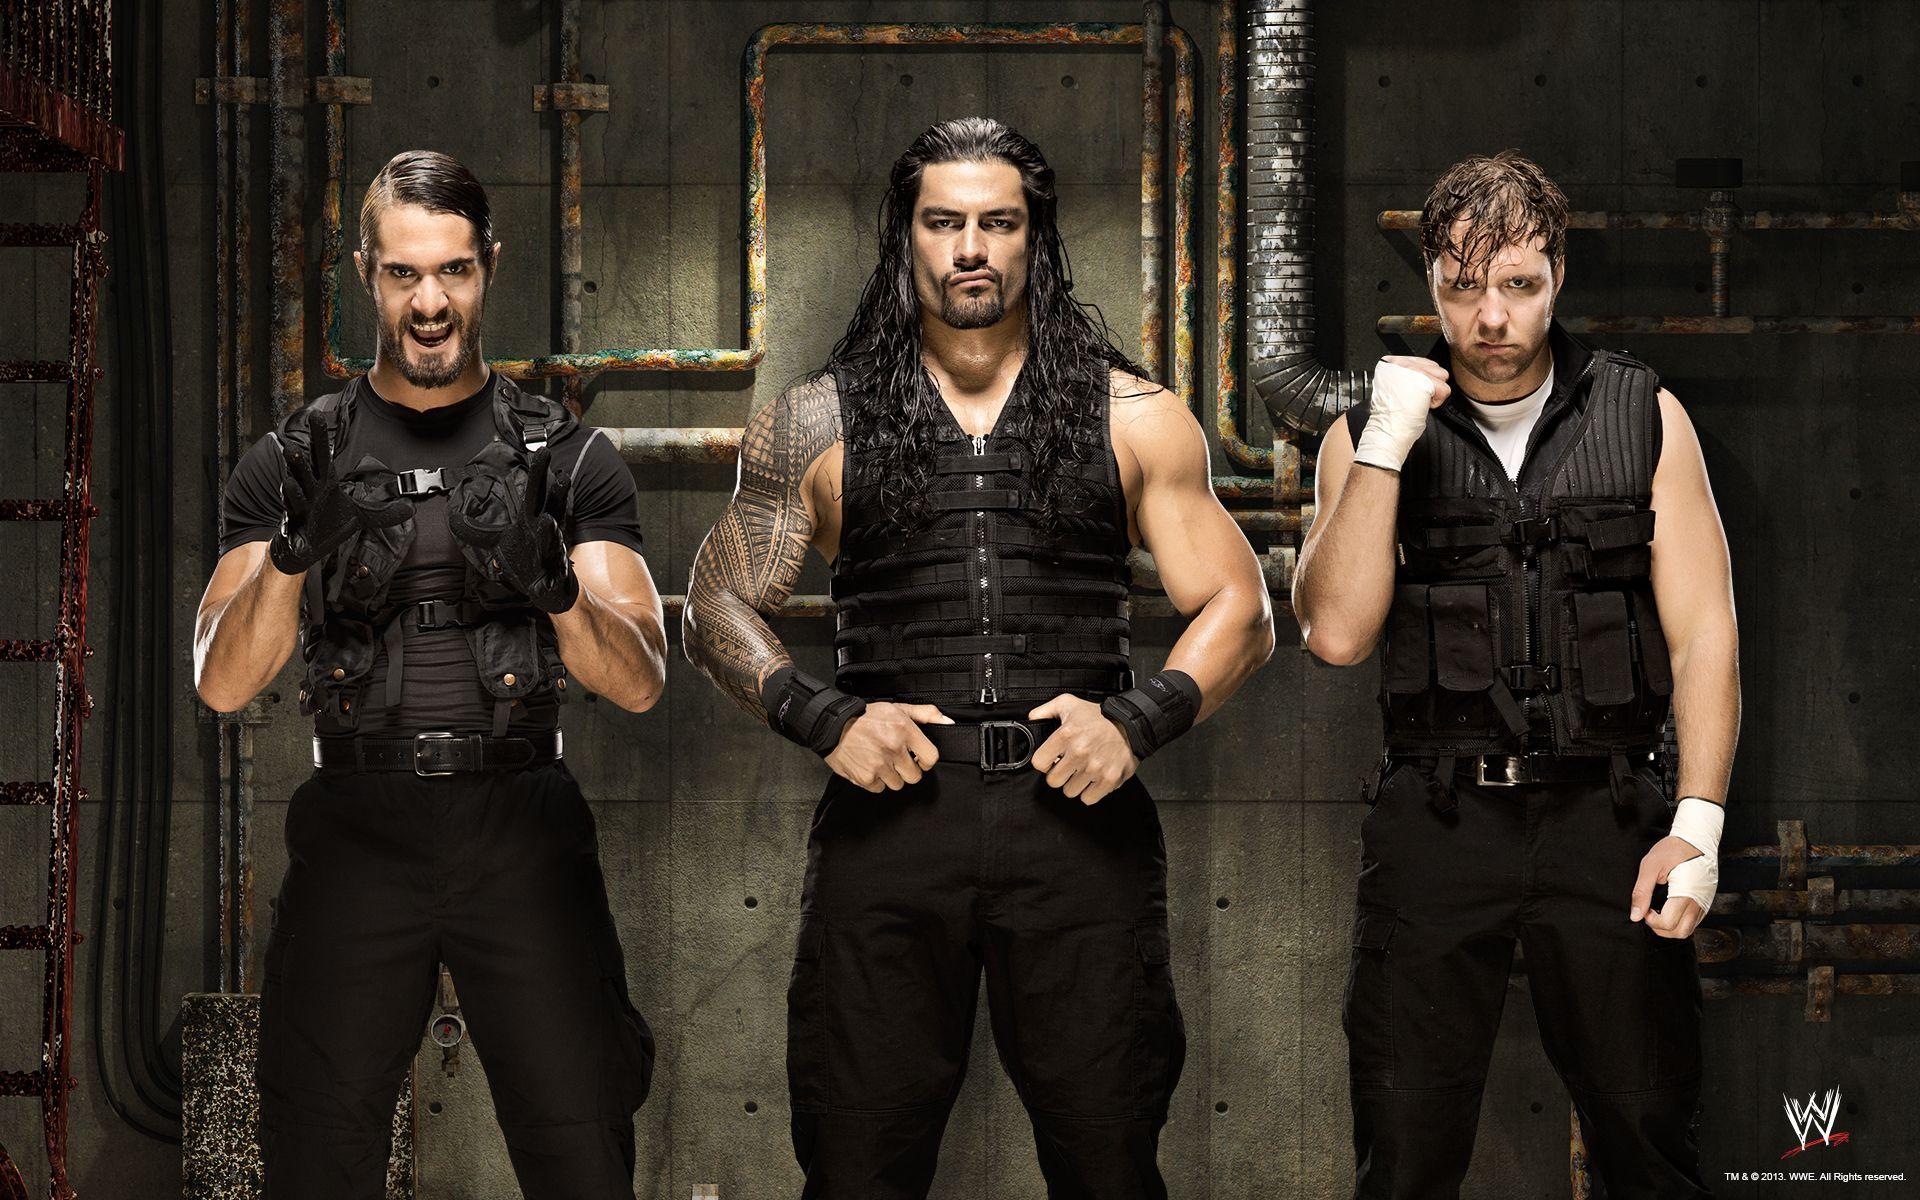 about wwe image WWE'S hound of justice HD wallpaper